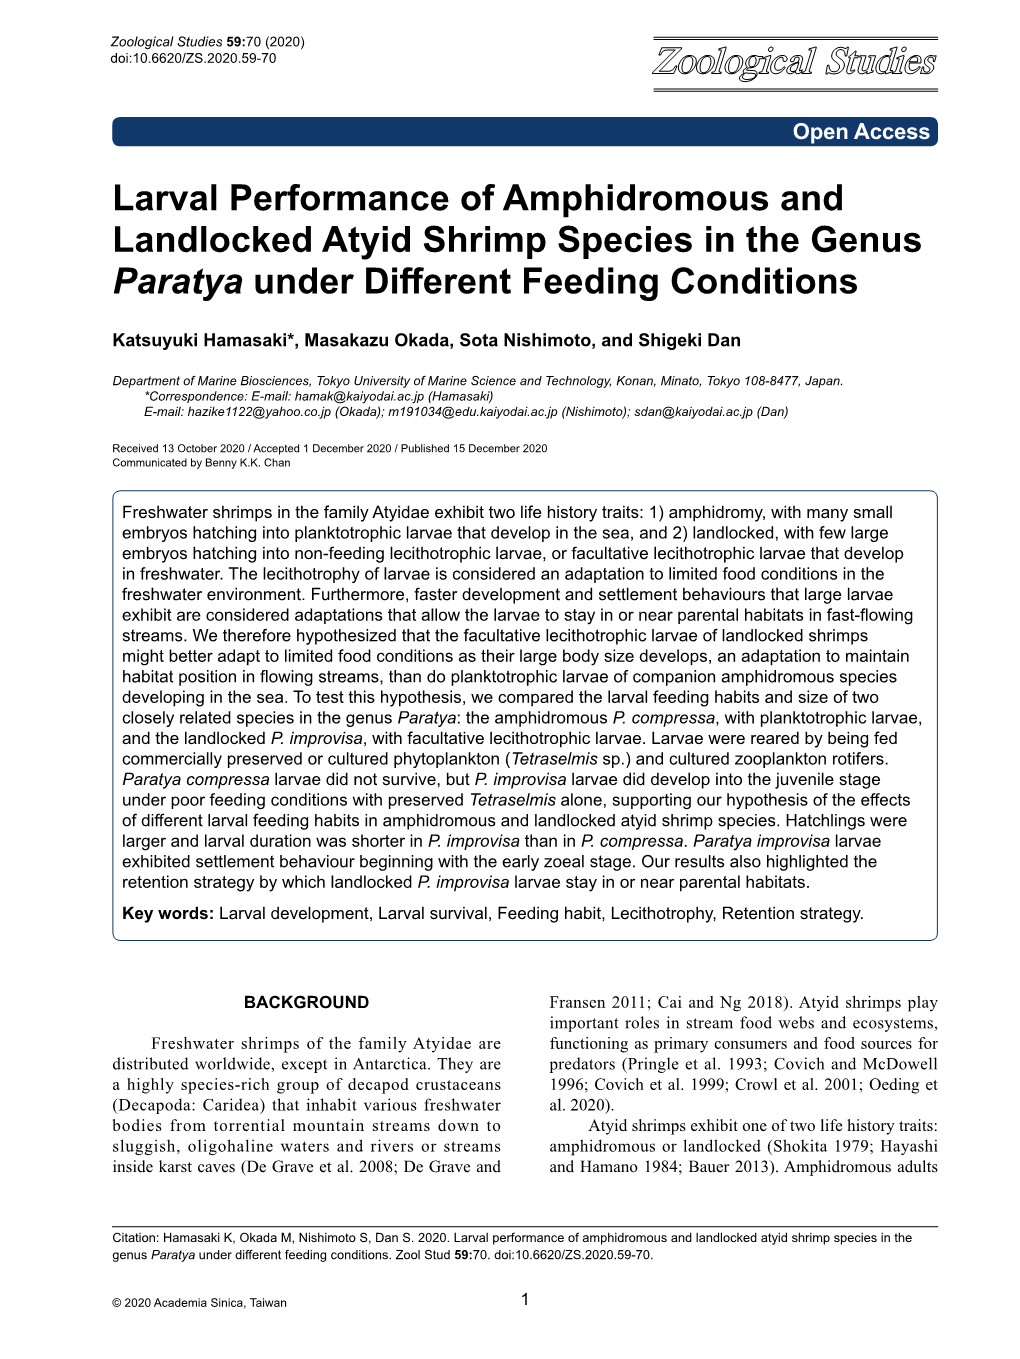 Larval Performance of Amphidromous and Landlocked Atyid Shrimp Species in the Genus Paratya Under Different Feeding Conditions